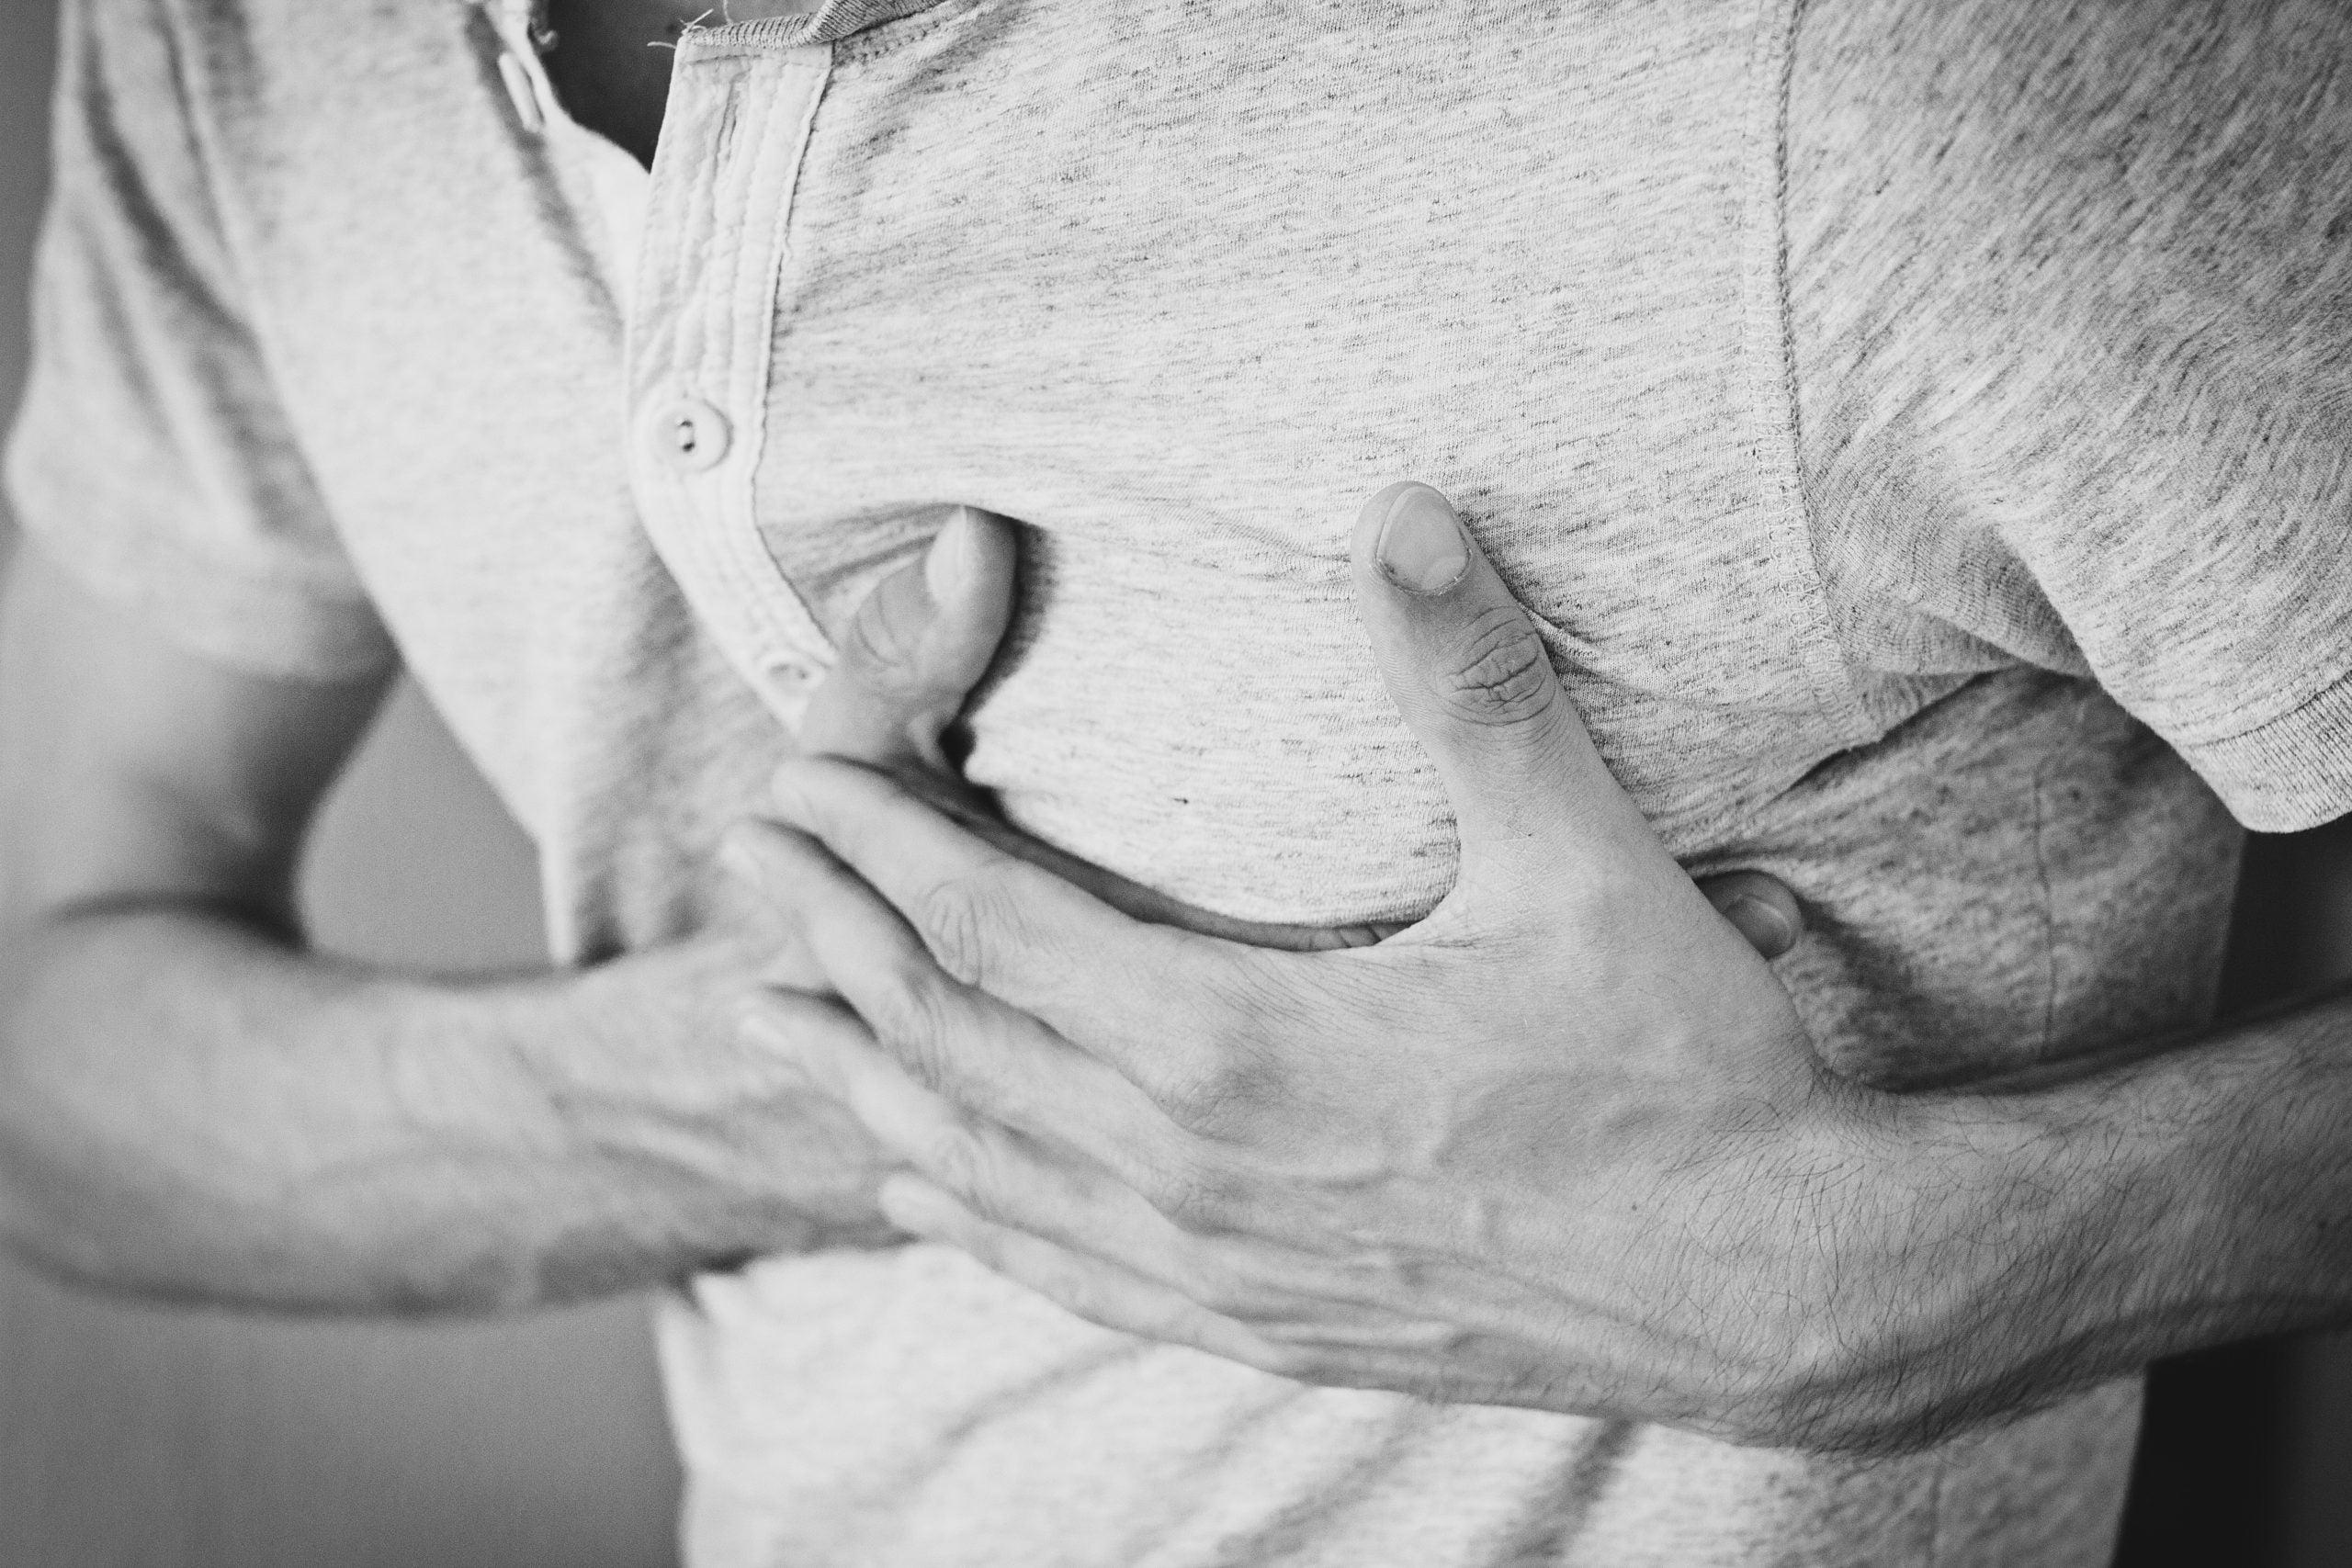 Heart Disease and Aging - What You Need to Know